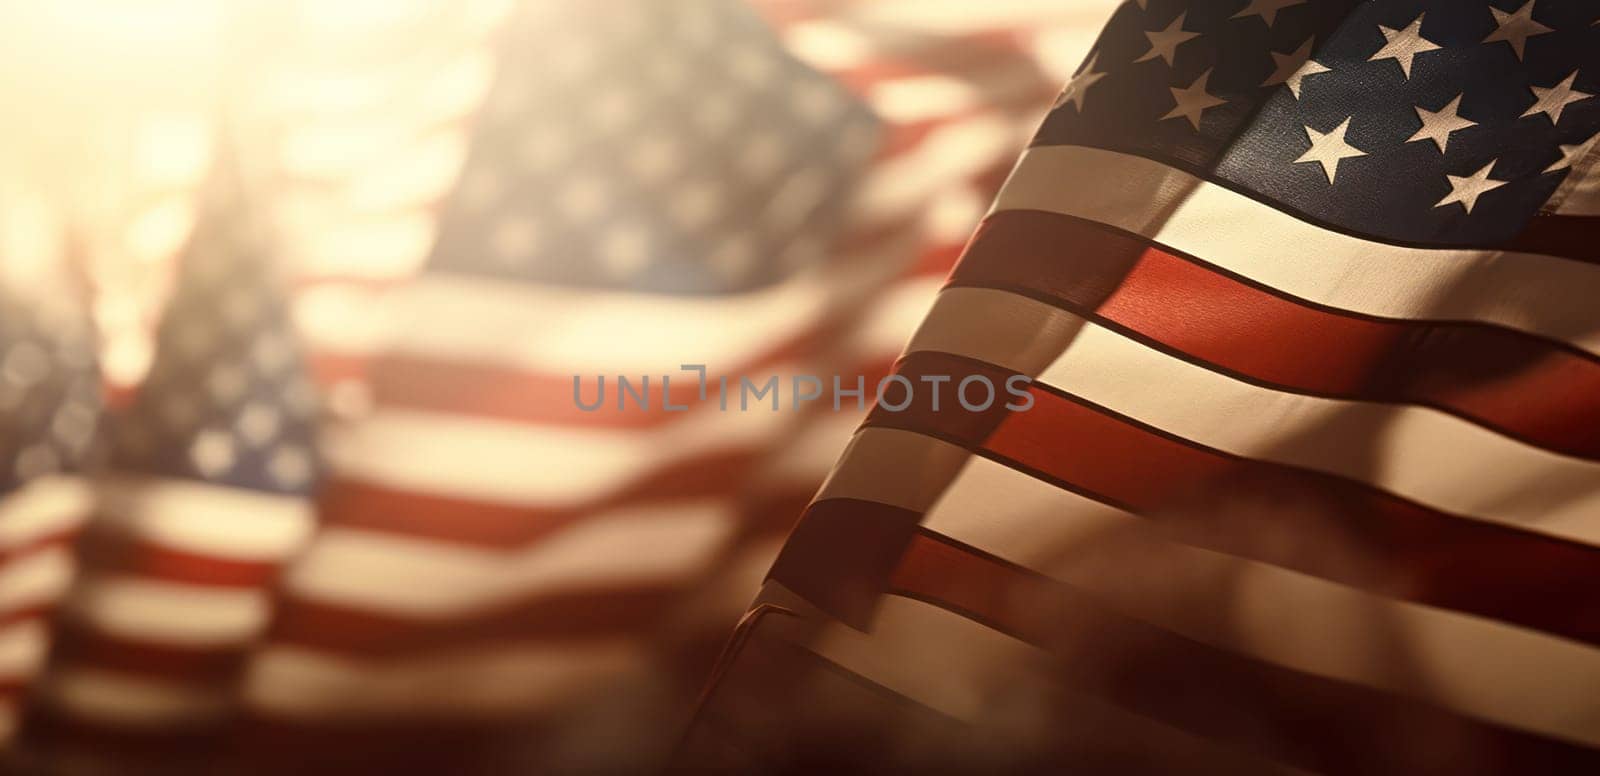 Symbolic Glory: Waving American Flag of Freedom and Patriotism against a Red, White, and Blue Background